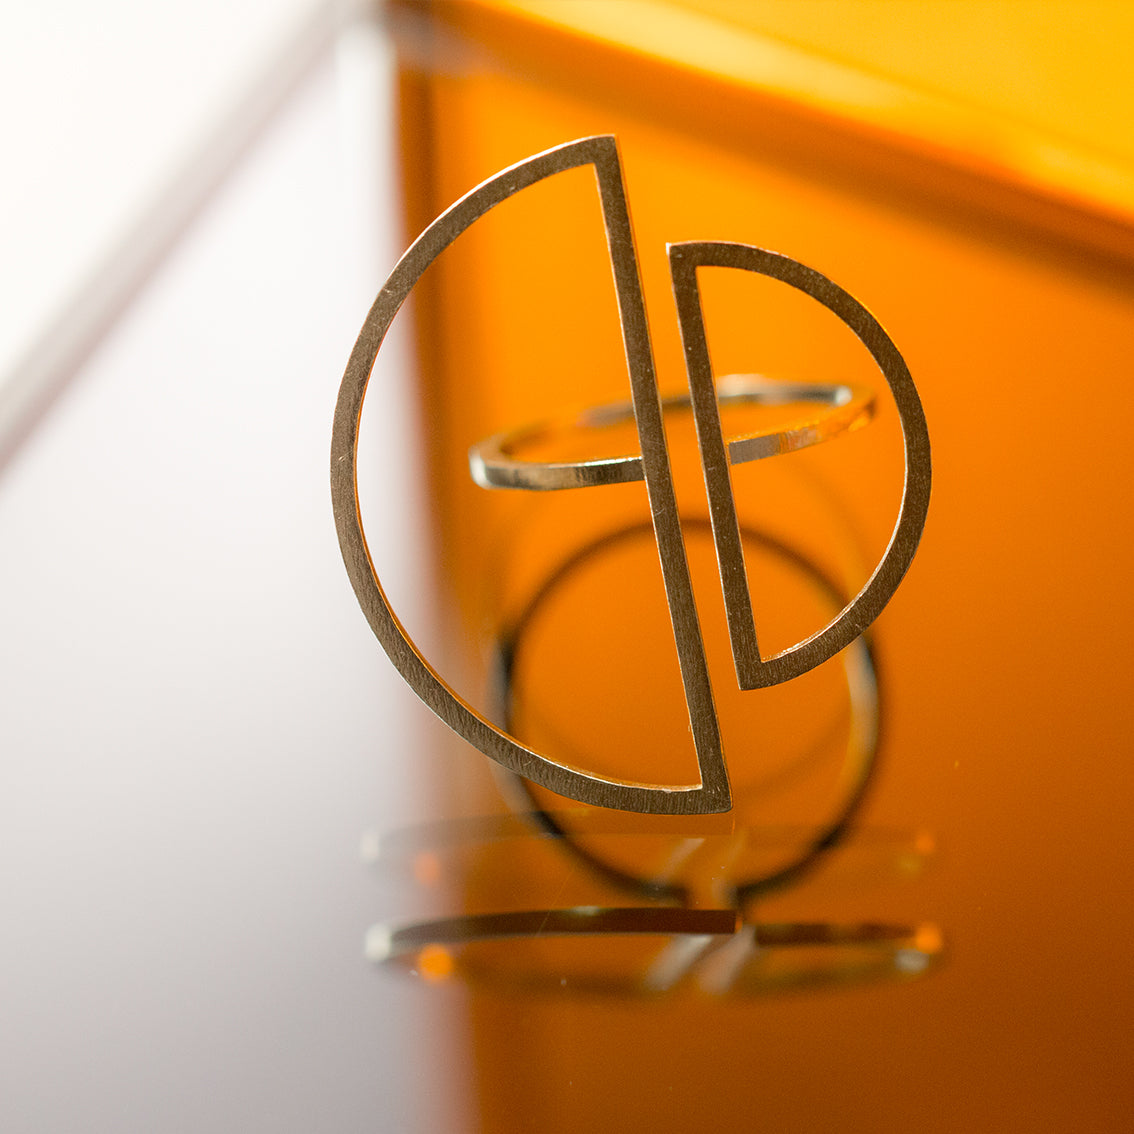 A minimally designed very light looking ring made of brass is sitting on a reflective surface with orange coloured glass in the background. The ring has a very thin band and is open on top to connect with two half circles which are also made of a very thin cross section. The two half circles are meant to hover on the adjacent fingers when the ring is worn.